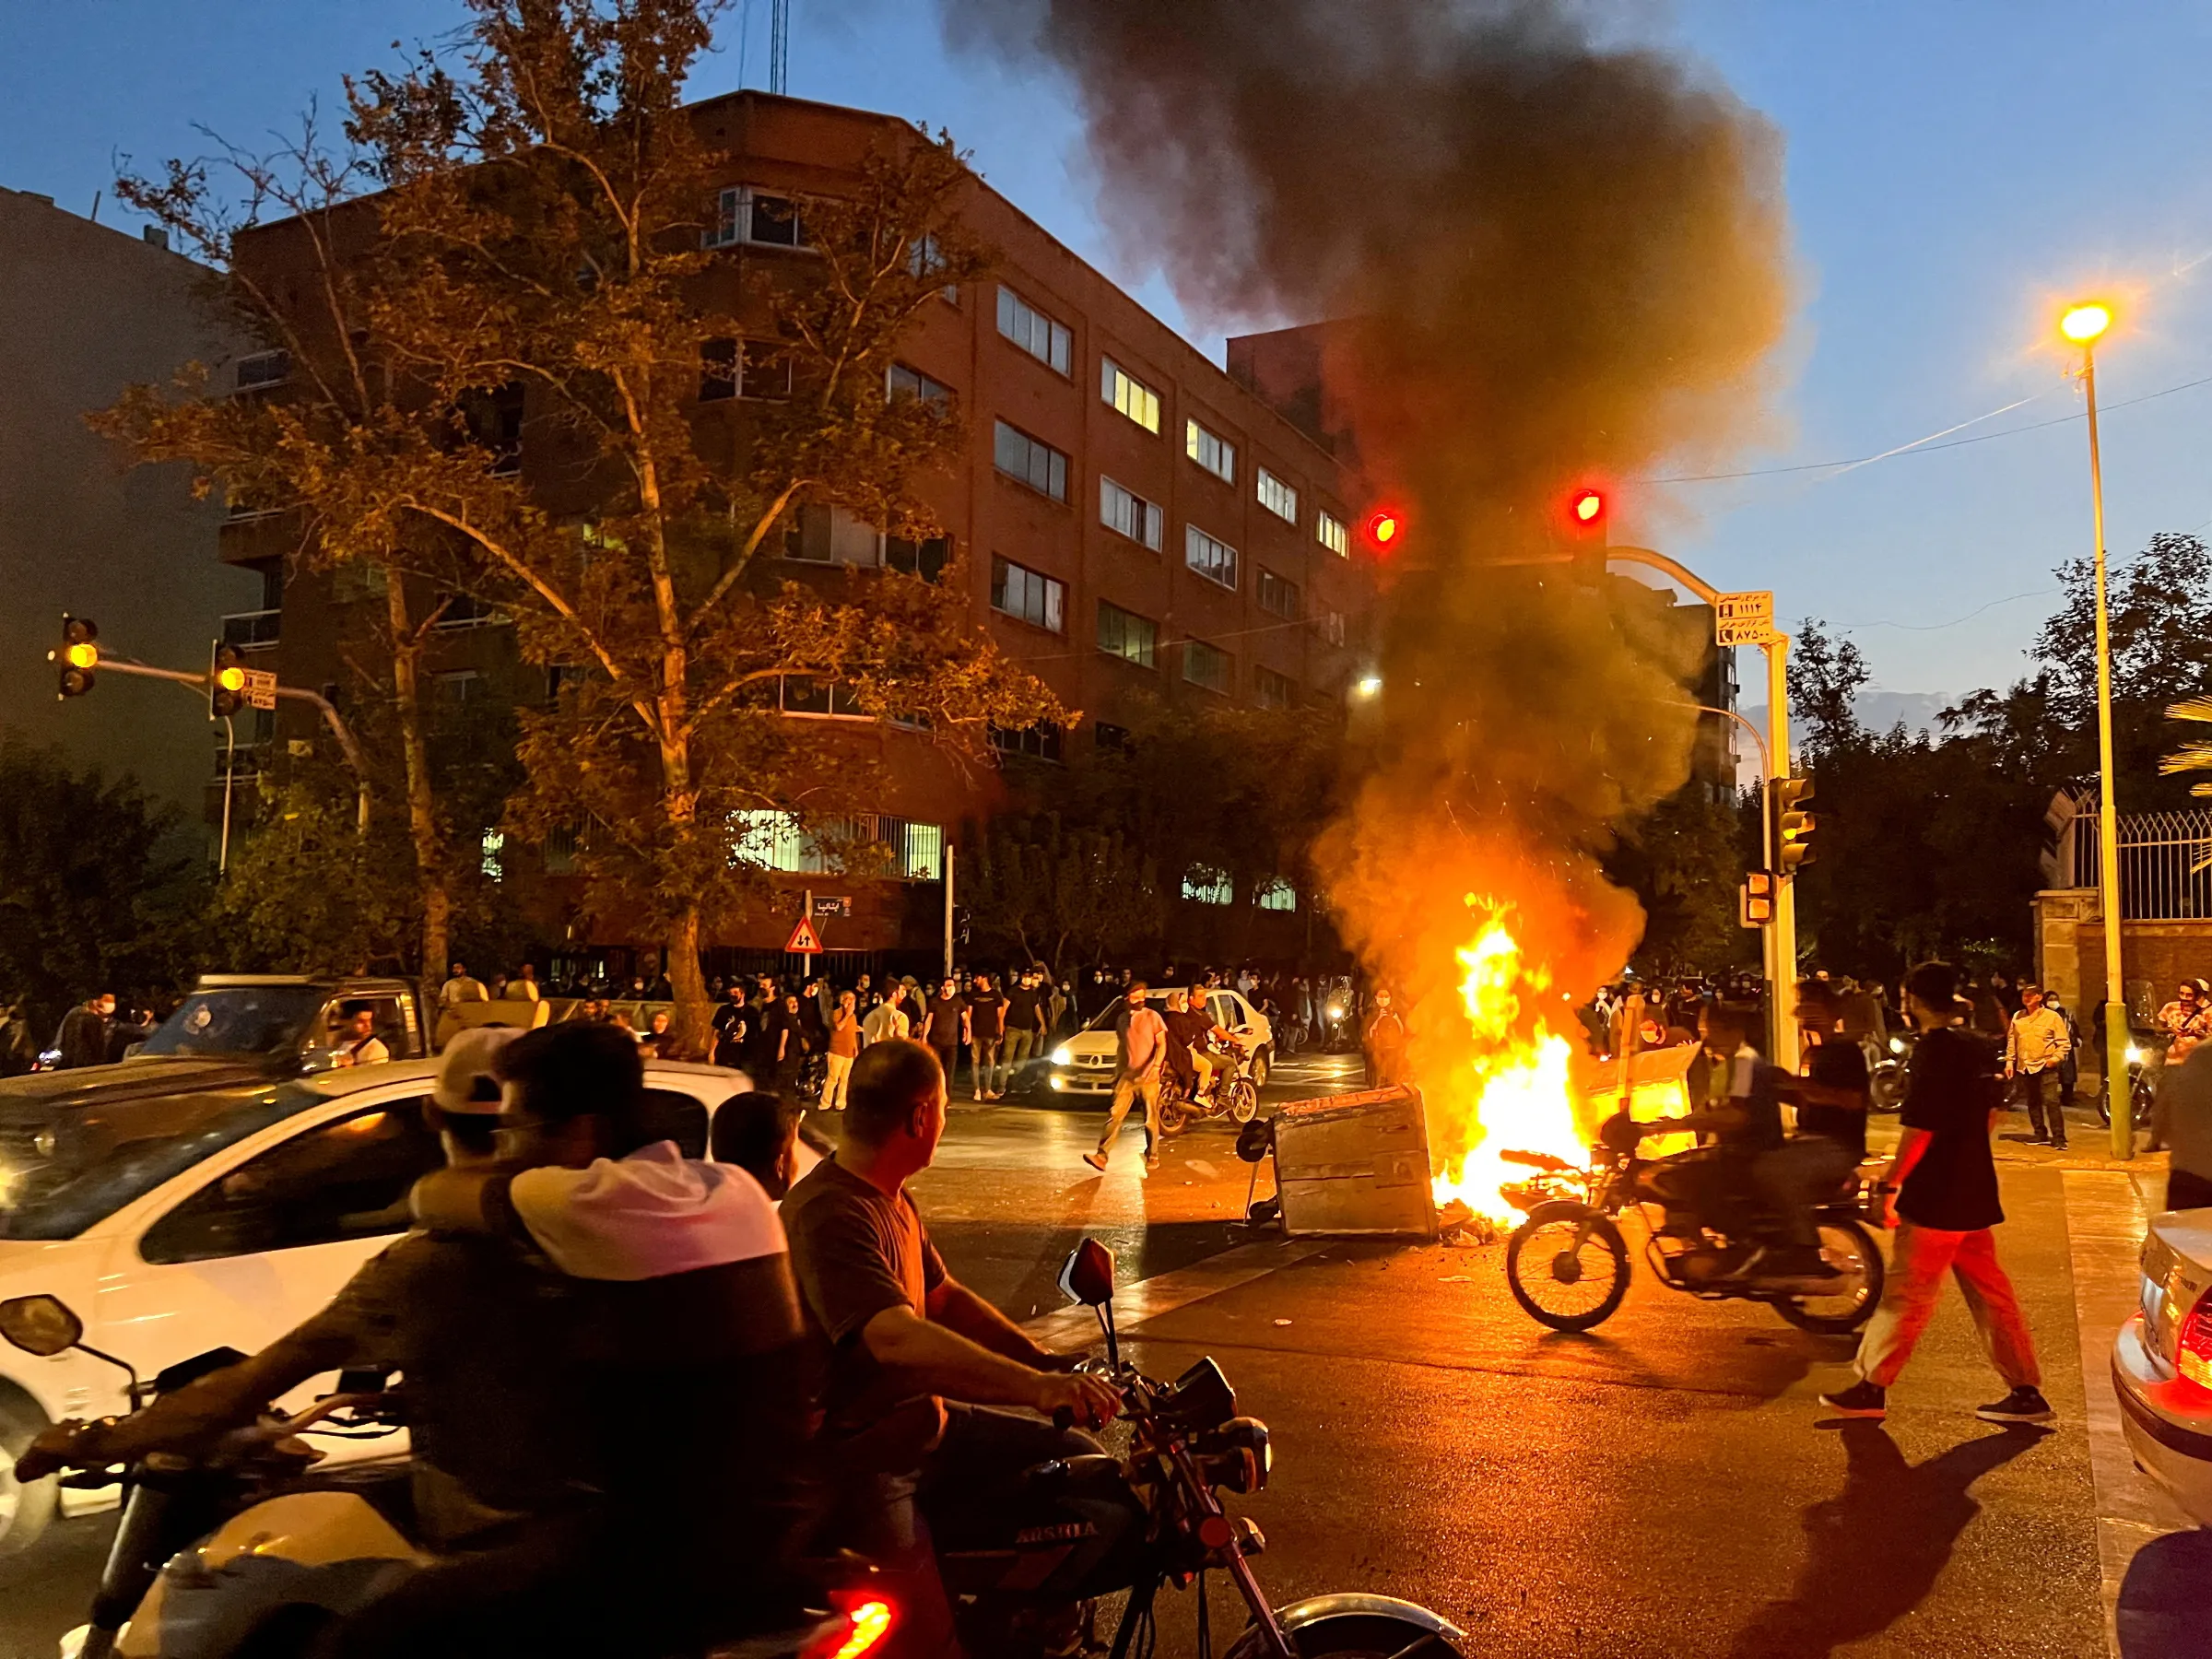 A police motorcycle burns during a protest over the death of Mahsa Amini, a woman who died after being arrested by the Islamic republic's 'morality police', in Tehran, Iran September 19, 2022. WANA (West Asia News Agency) via REUTERS